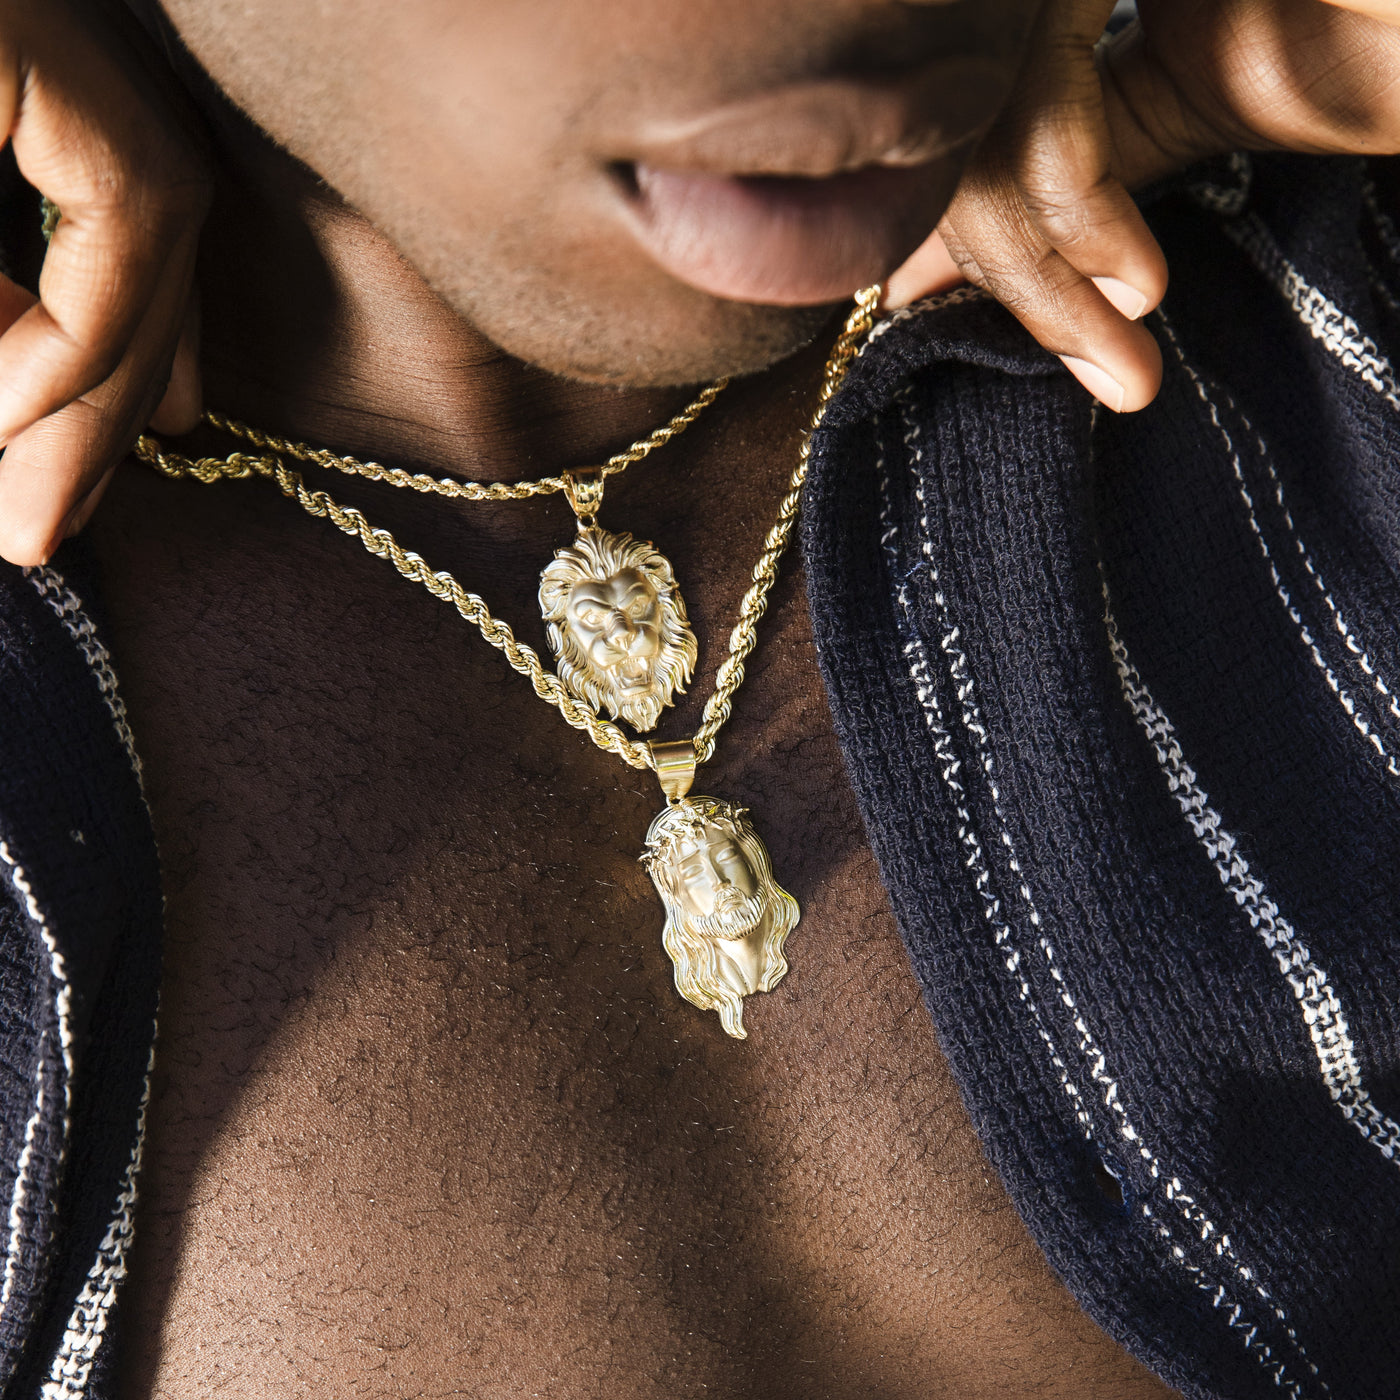 Exploring the Necklace Spectrum: A Look at Bayam Jewelry's Gold Necklace Collection